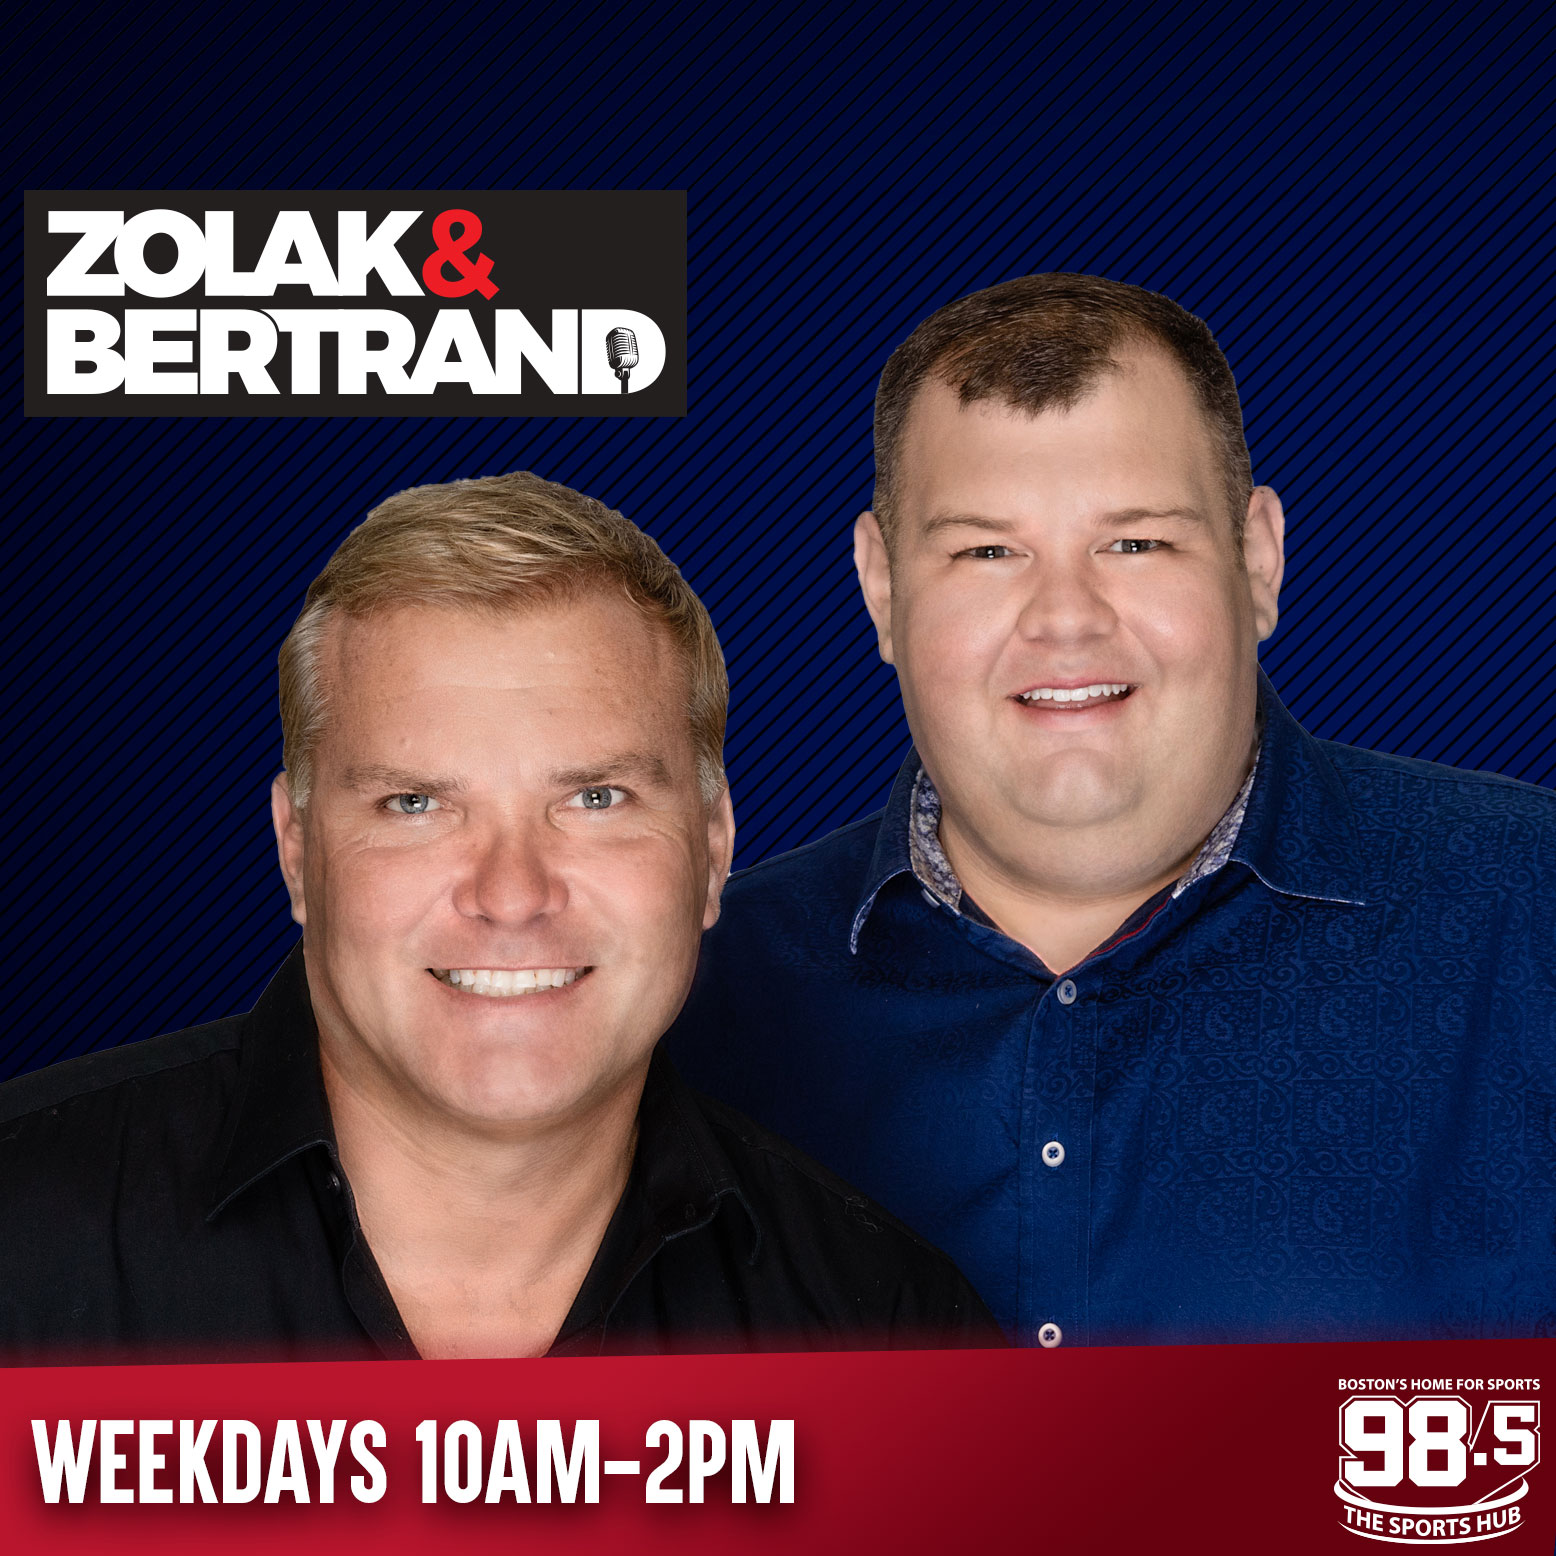 Scott Zolak: "There's a vibe of acceptance with the Patriots"